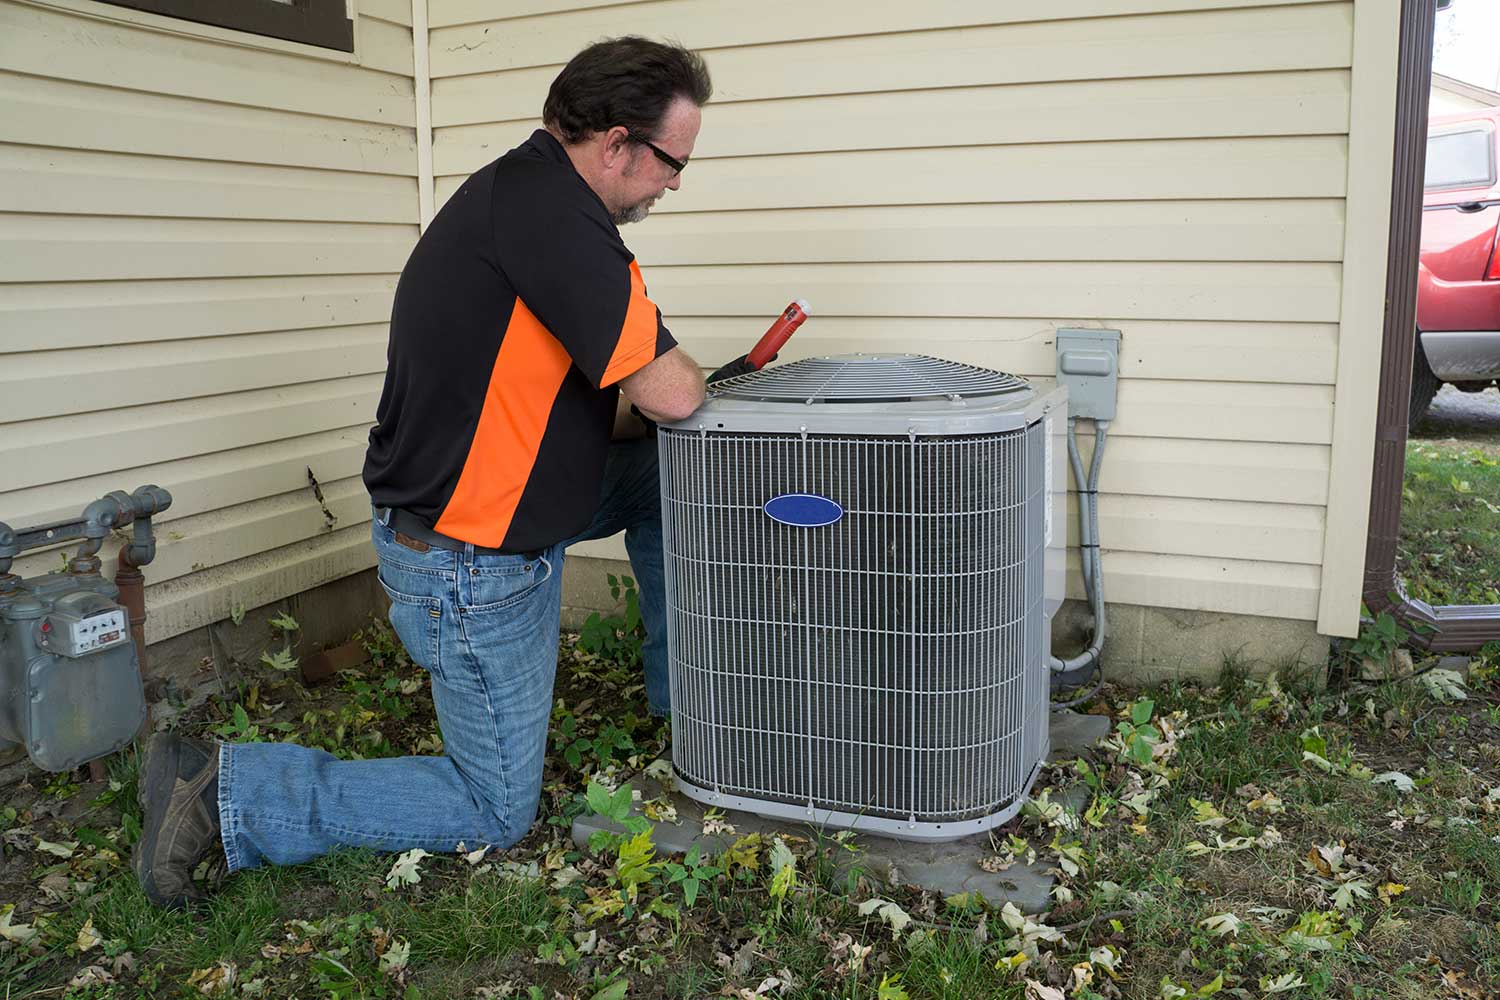 Acts of kindness – helped Heating and Air Conditioning tech buy spouse gift